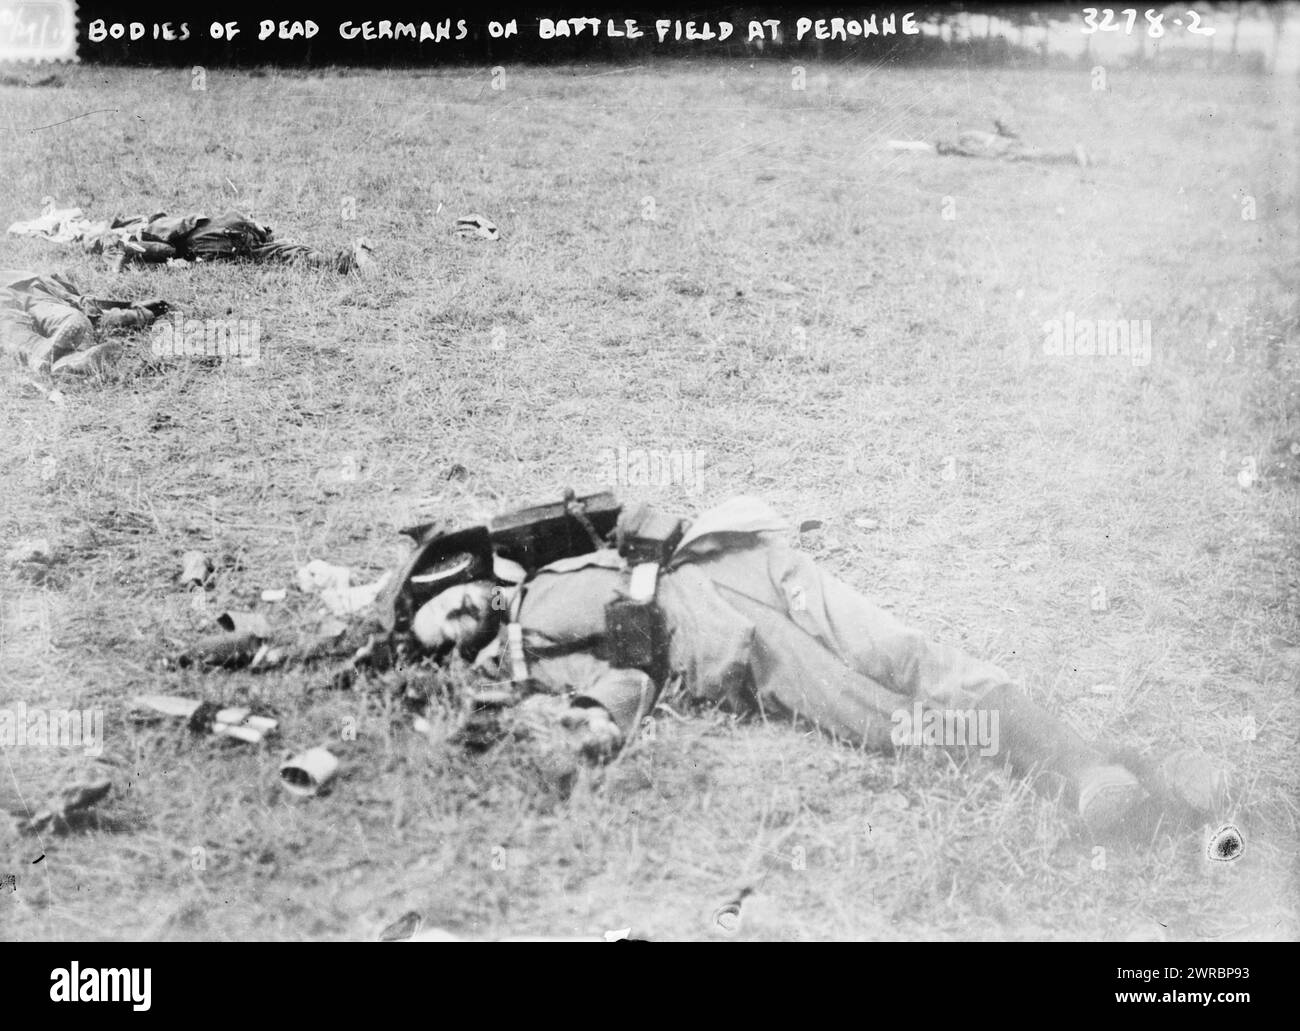 Bodies of dead Germans on battle field at Peronne, Photograph shows dead German soldiers on battlefield at Fère Champenoise after a battle during World War I., 1914 Oct. 29, World War, 1914-1918, Glass negatives, 1 negative: glass Stock Photo